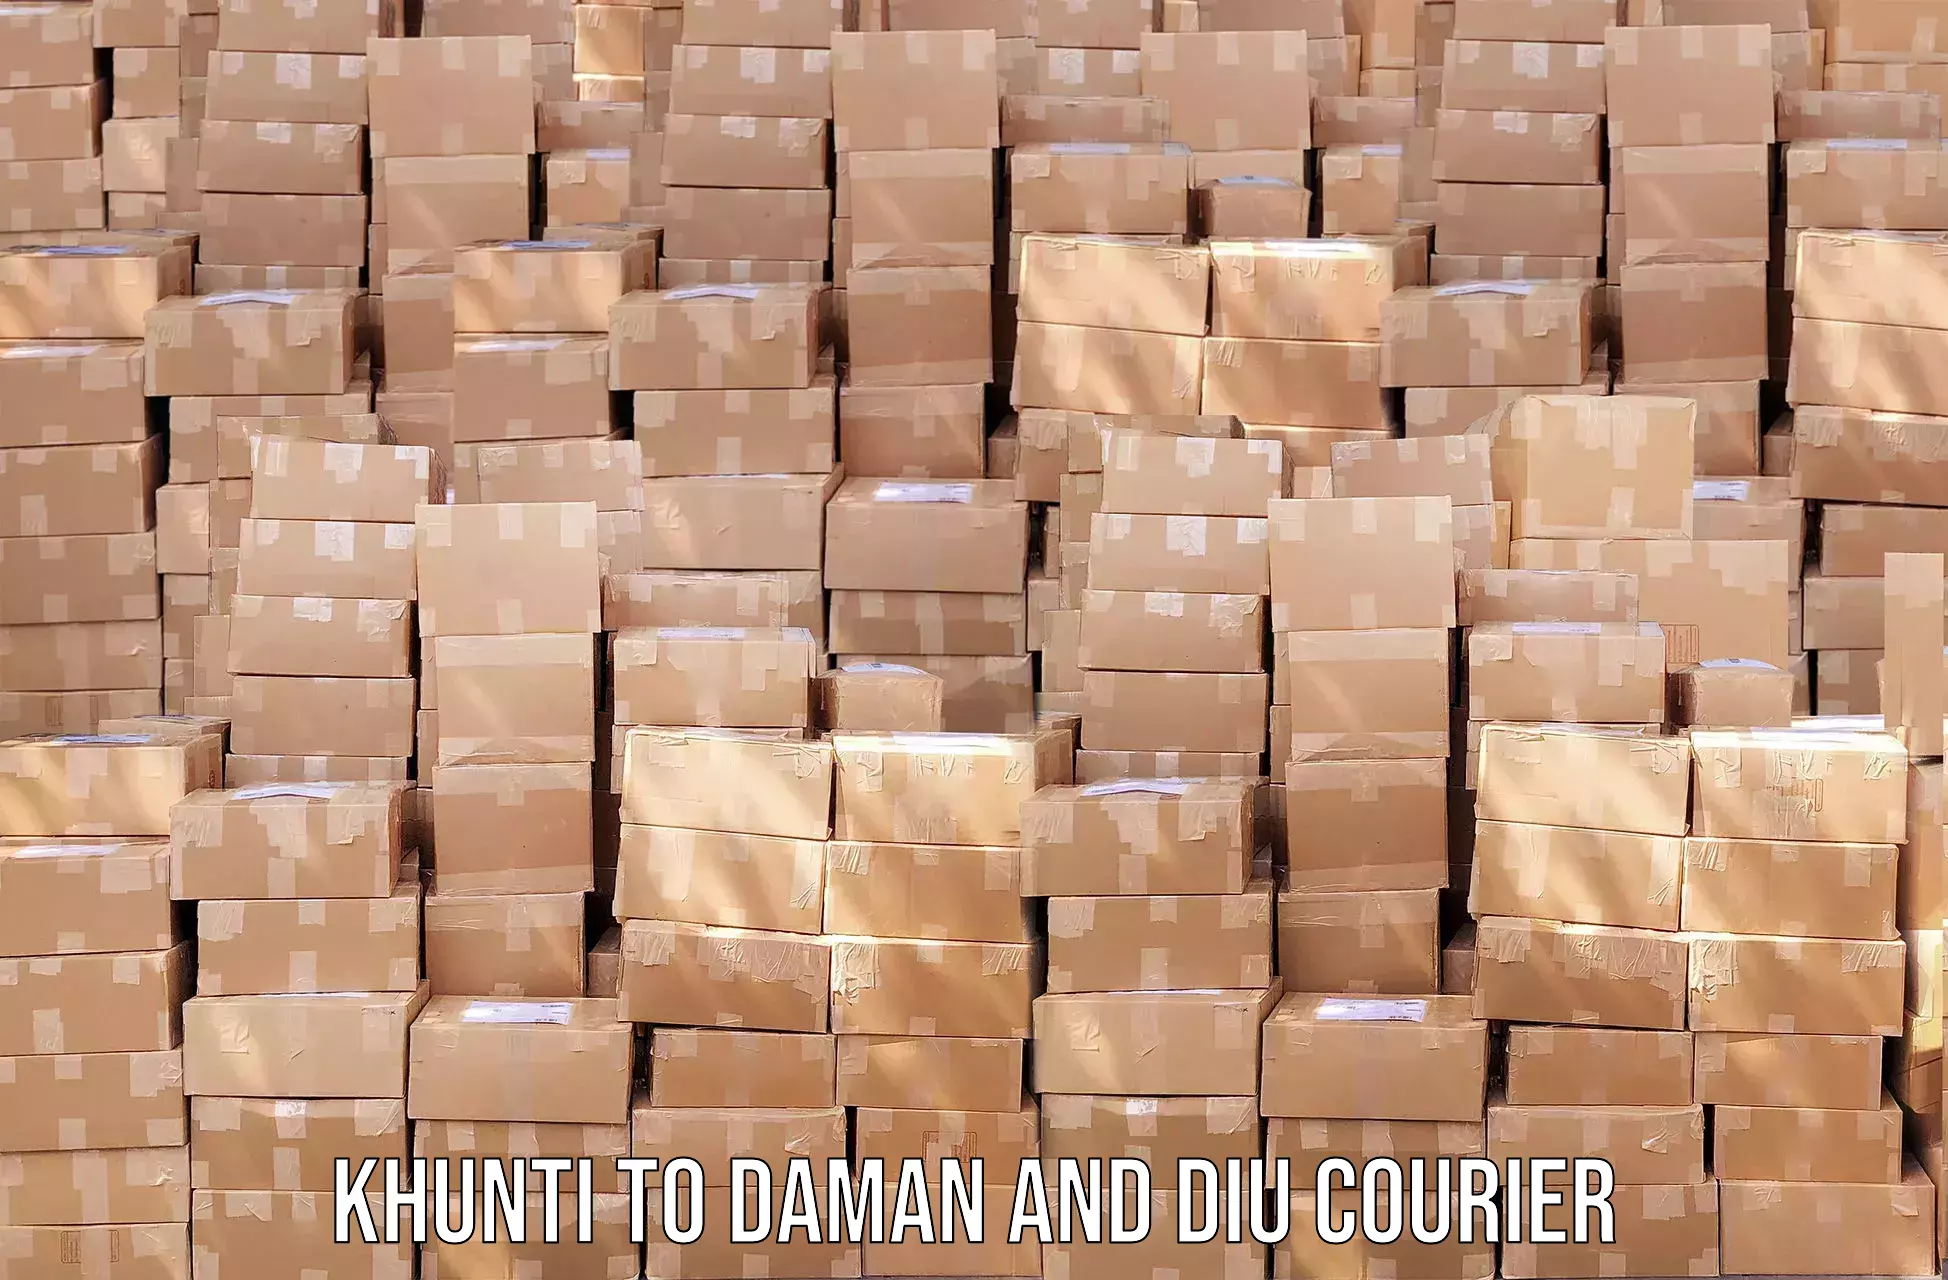 Global freight services Khunti to Daman